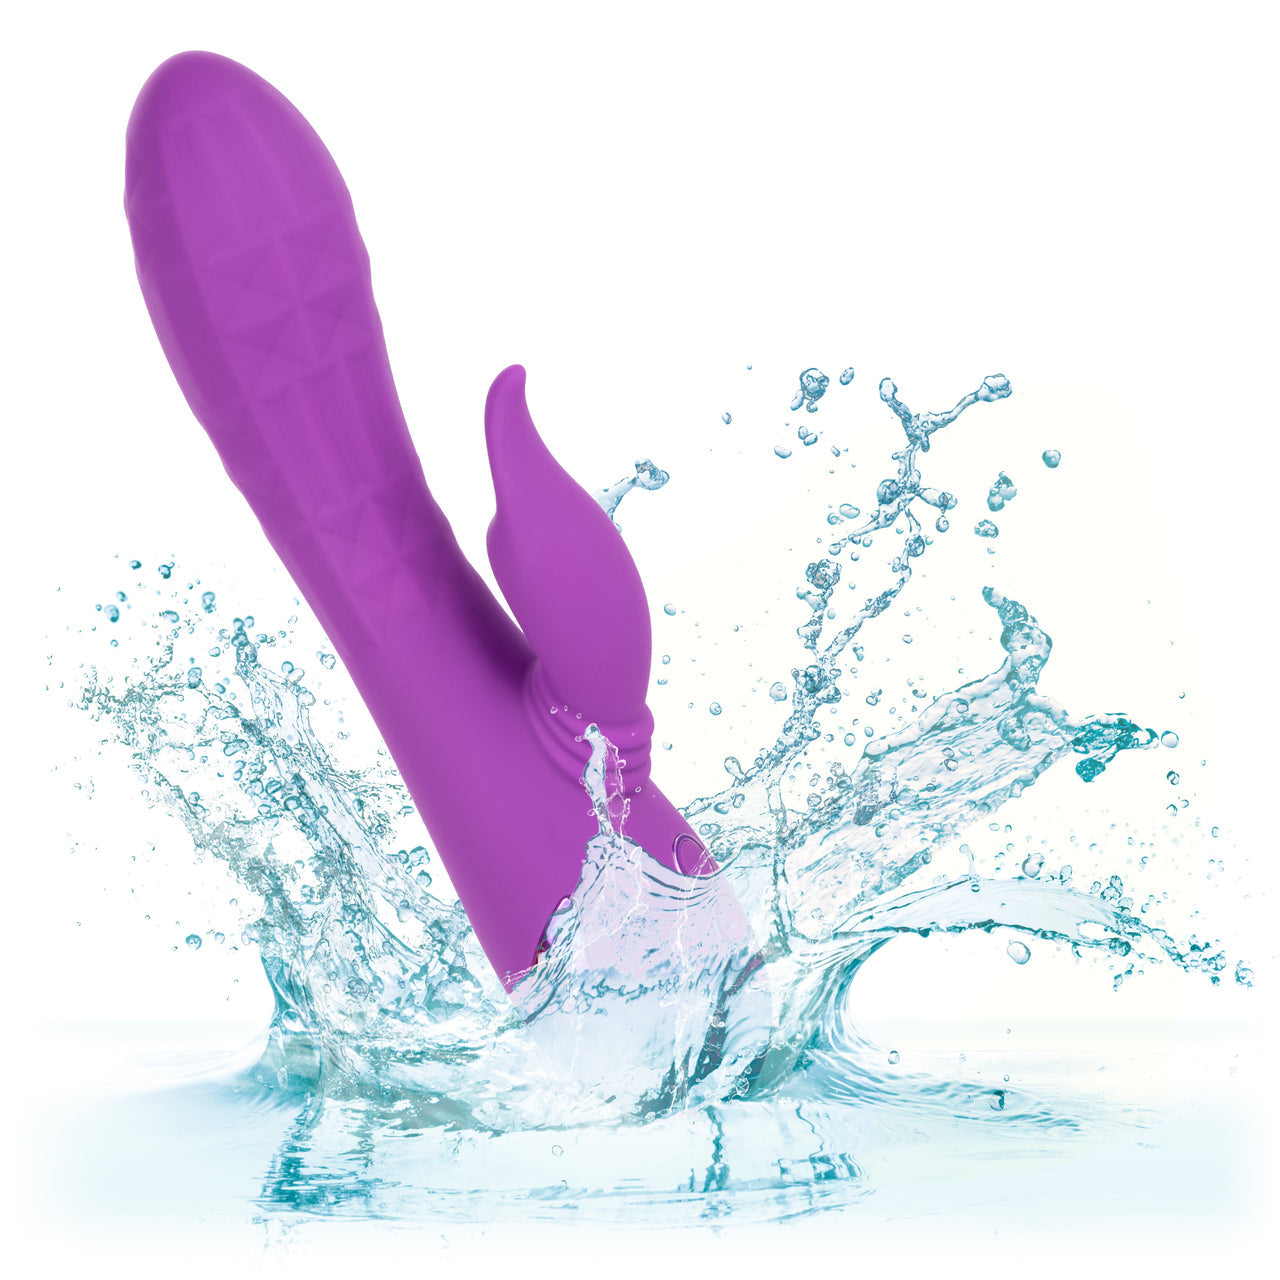 California Dreaming Valley Vamp Rabbit Vibrator - Thorn & Feather Sex Toy Canada